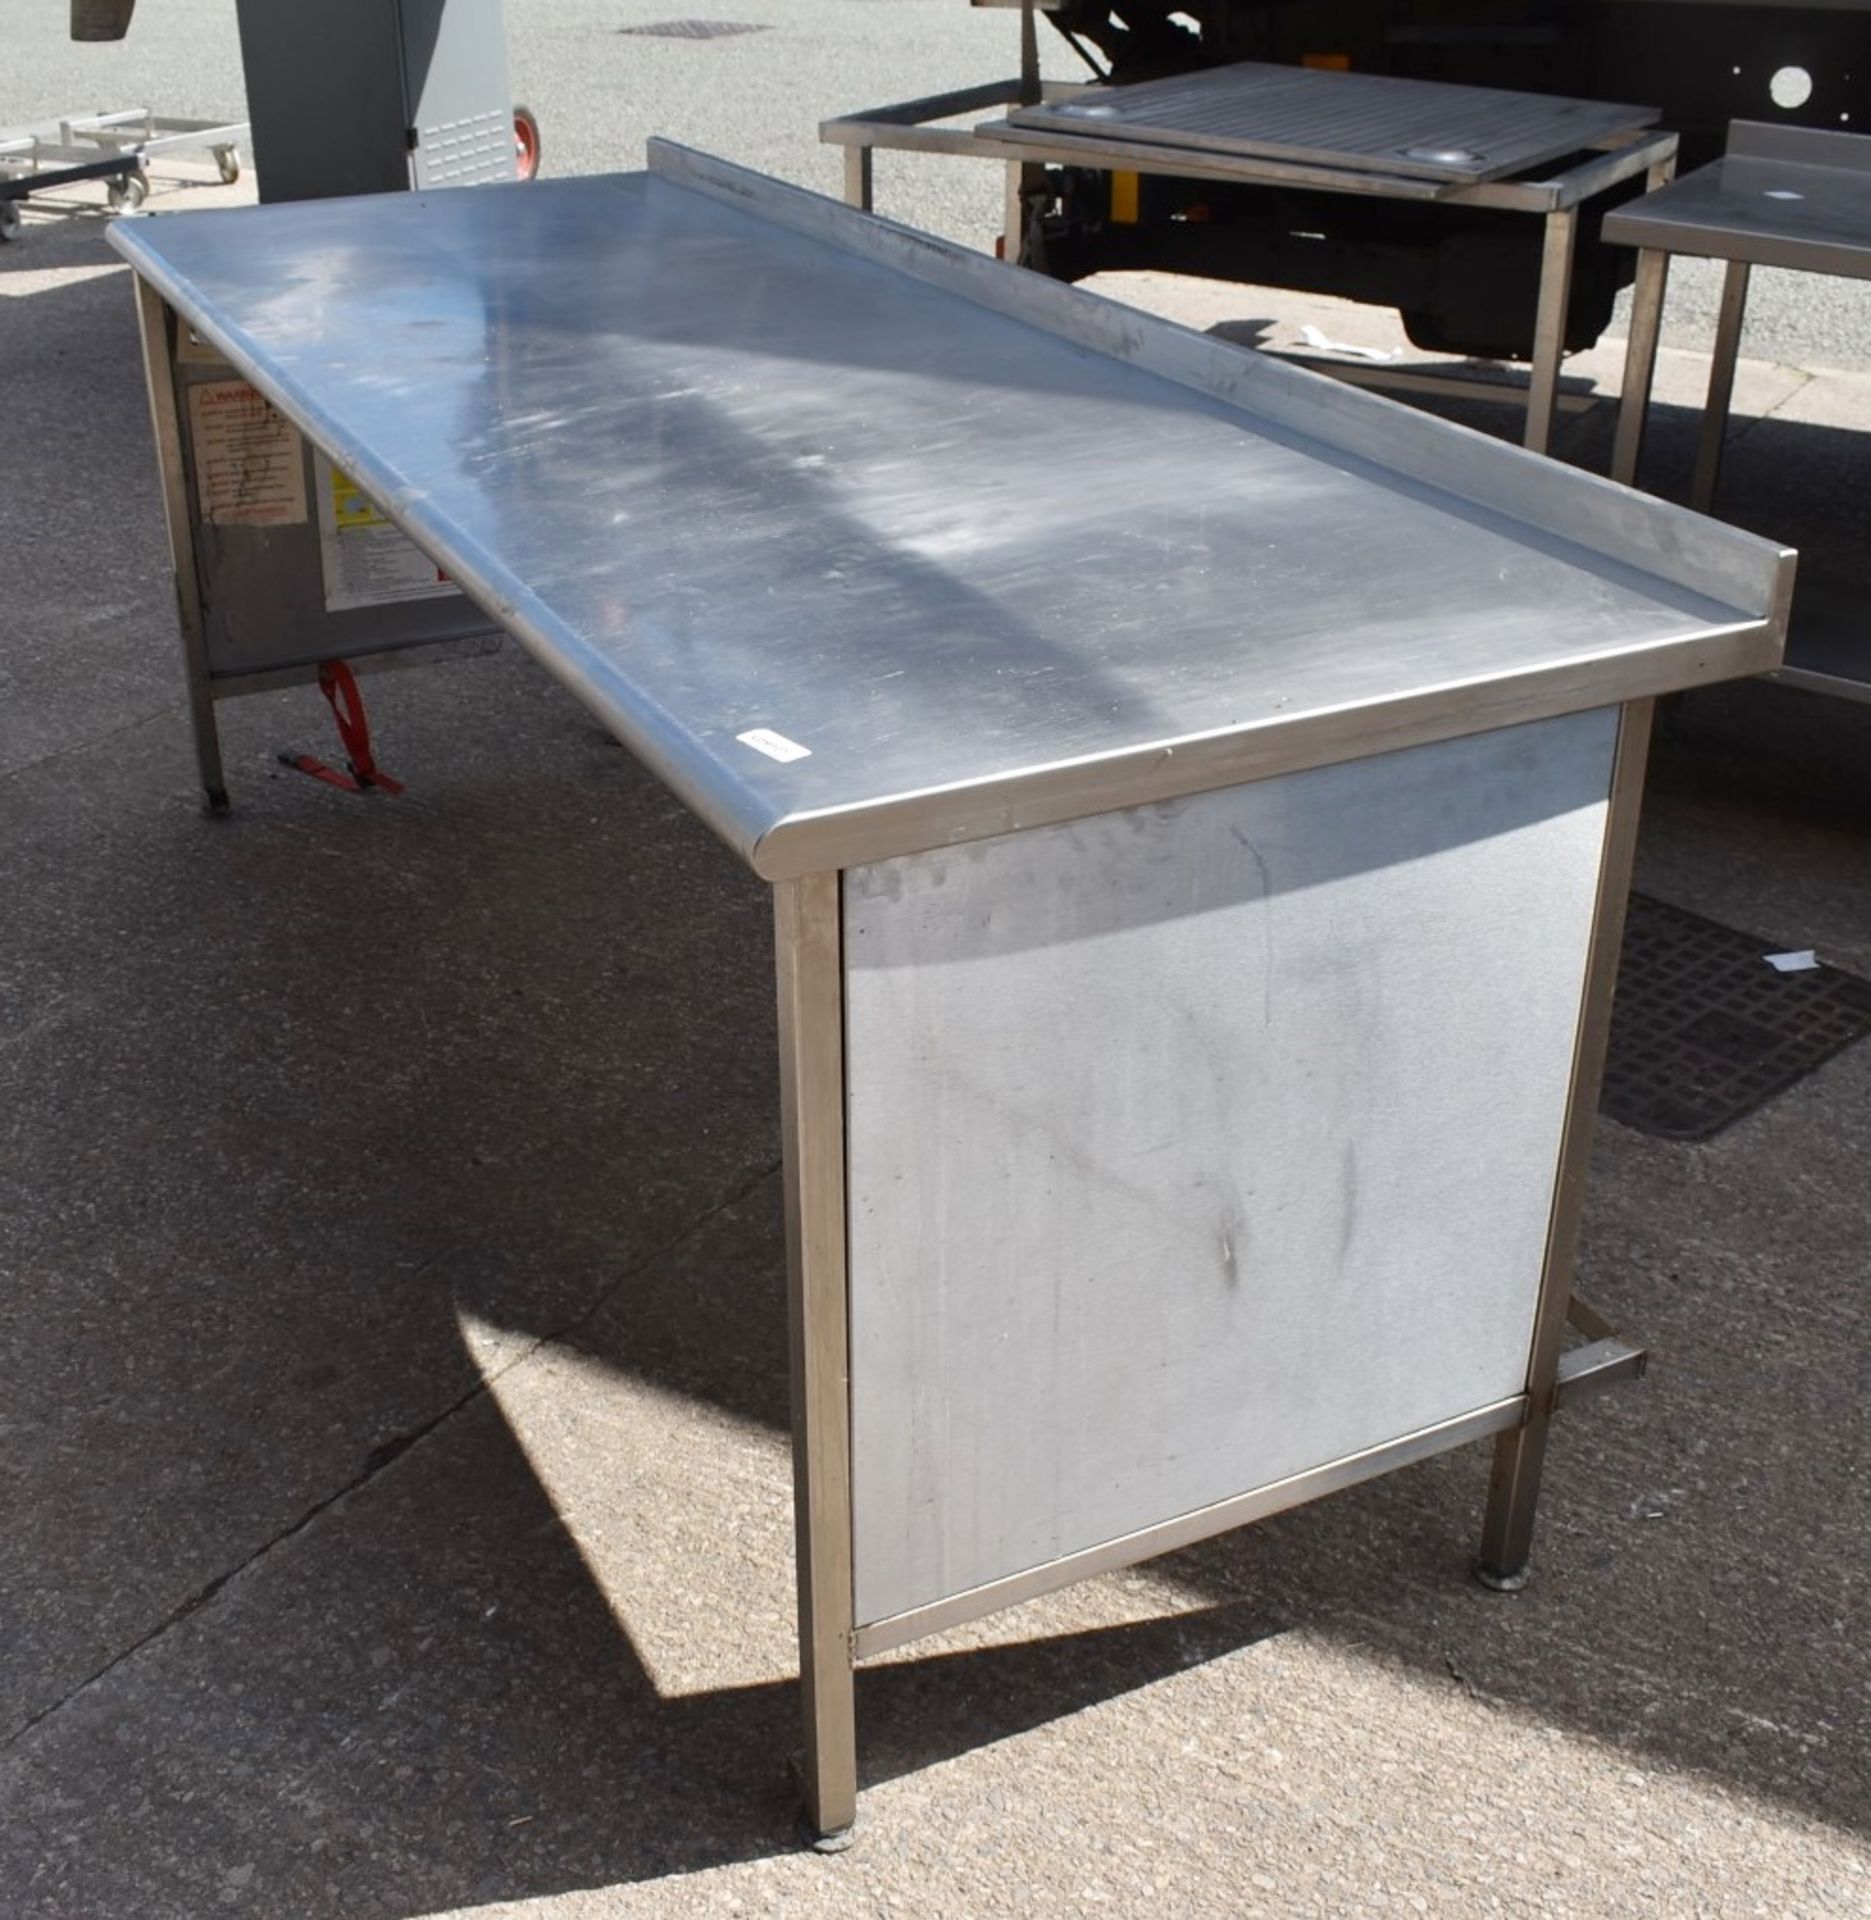 1 x Stainless Steel Prep Table With Closed Back and Sides - Dimensions: H87 x W200 x D80 cms - - Image 4 of 7